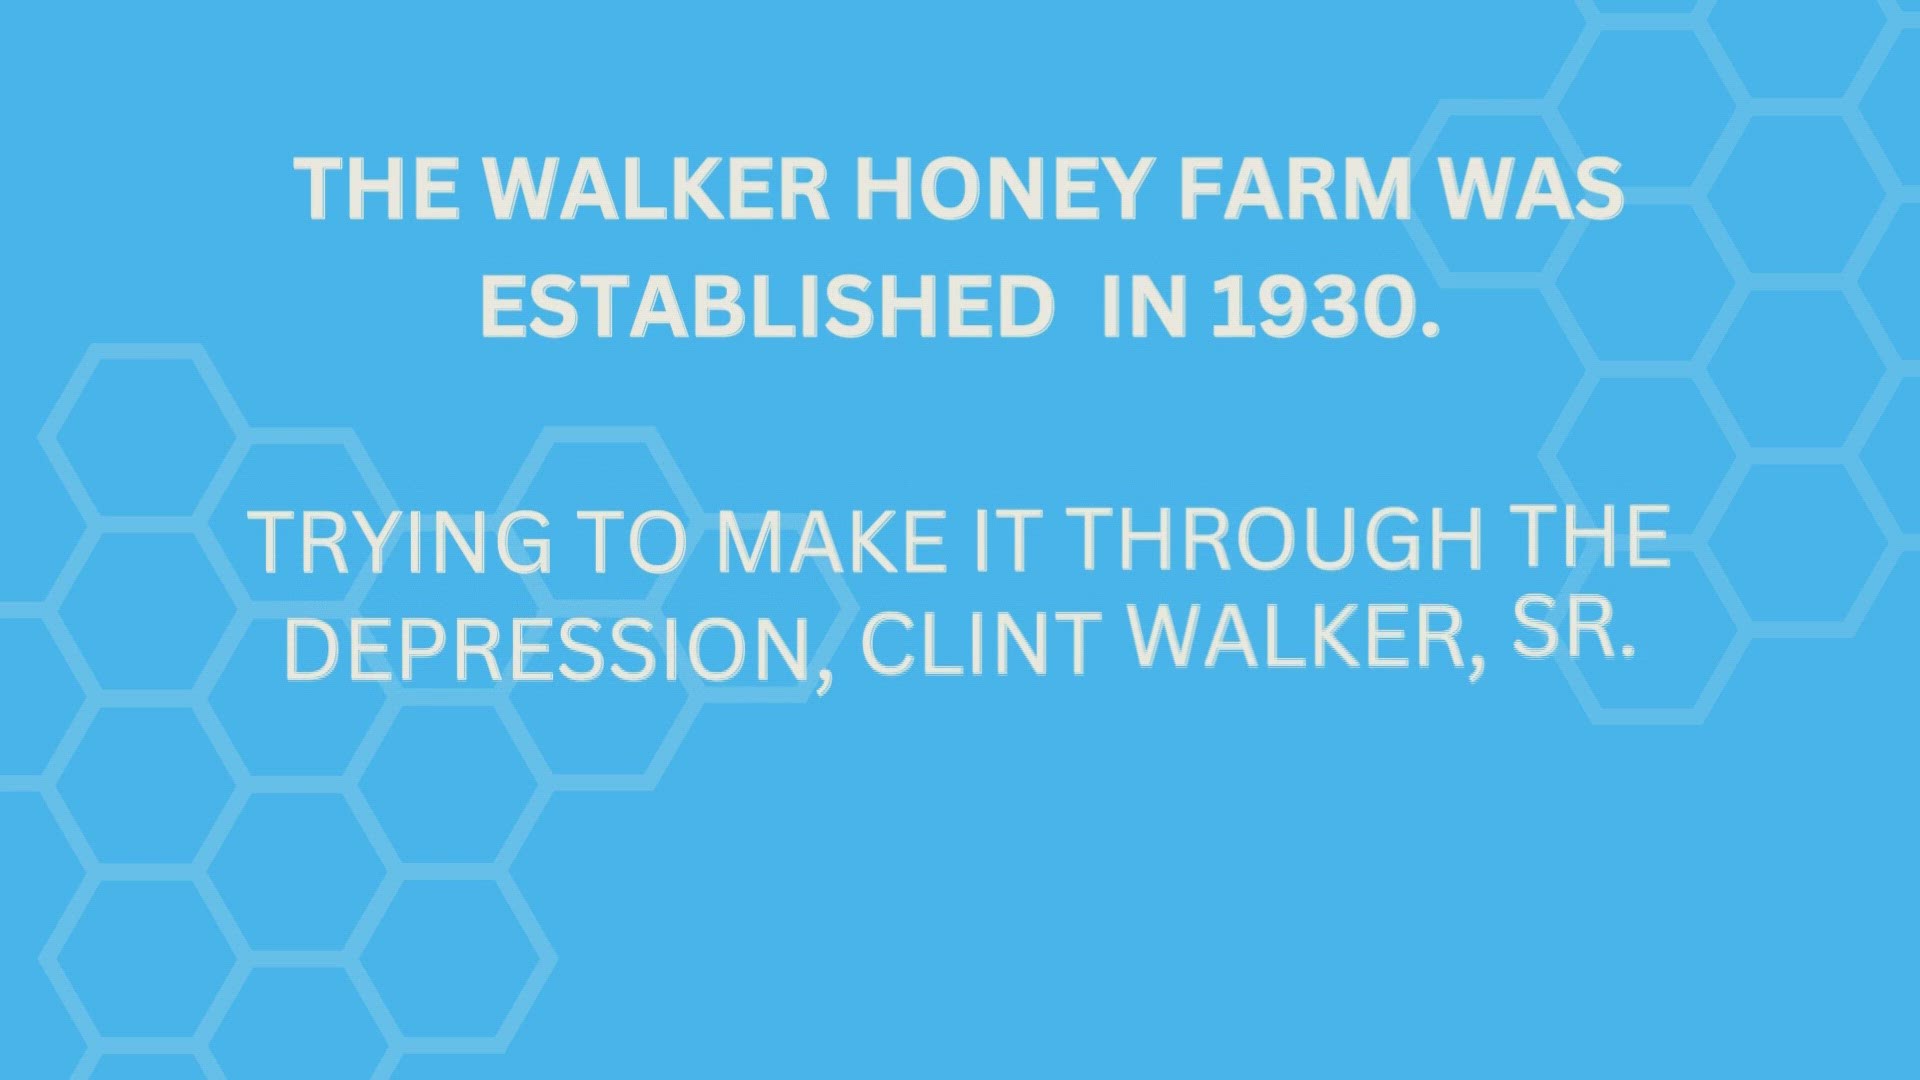 Honeybees are disappearing at an alarming rate, causing future concerns for beekeepers at Walker Honey Farm.